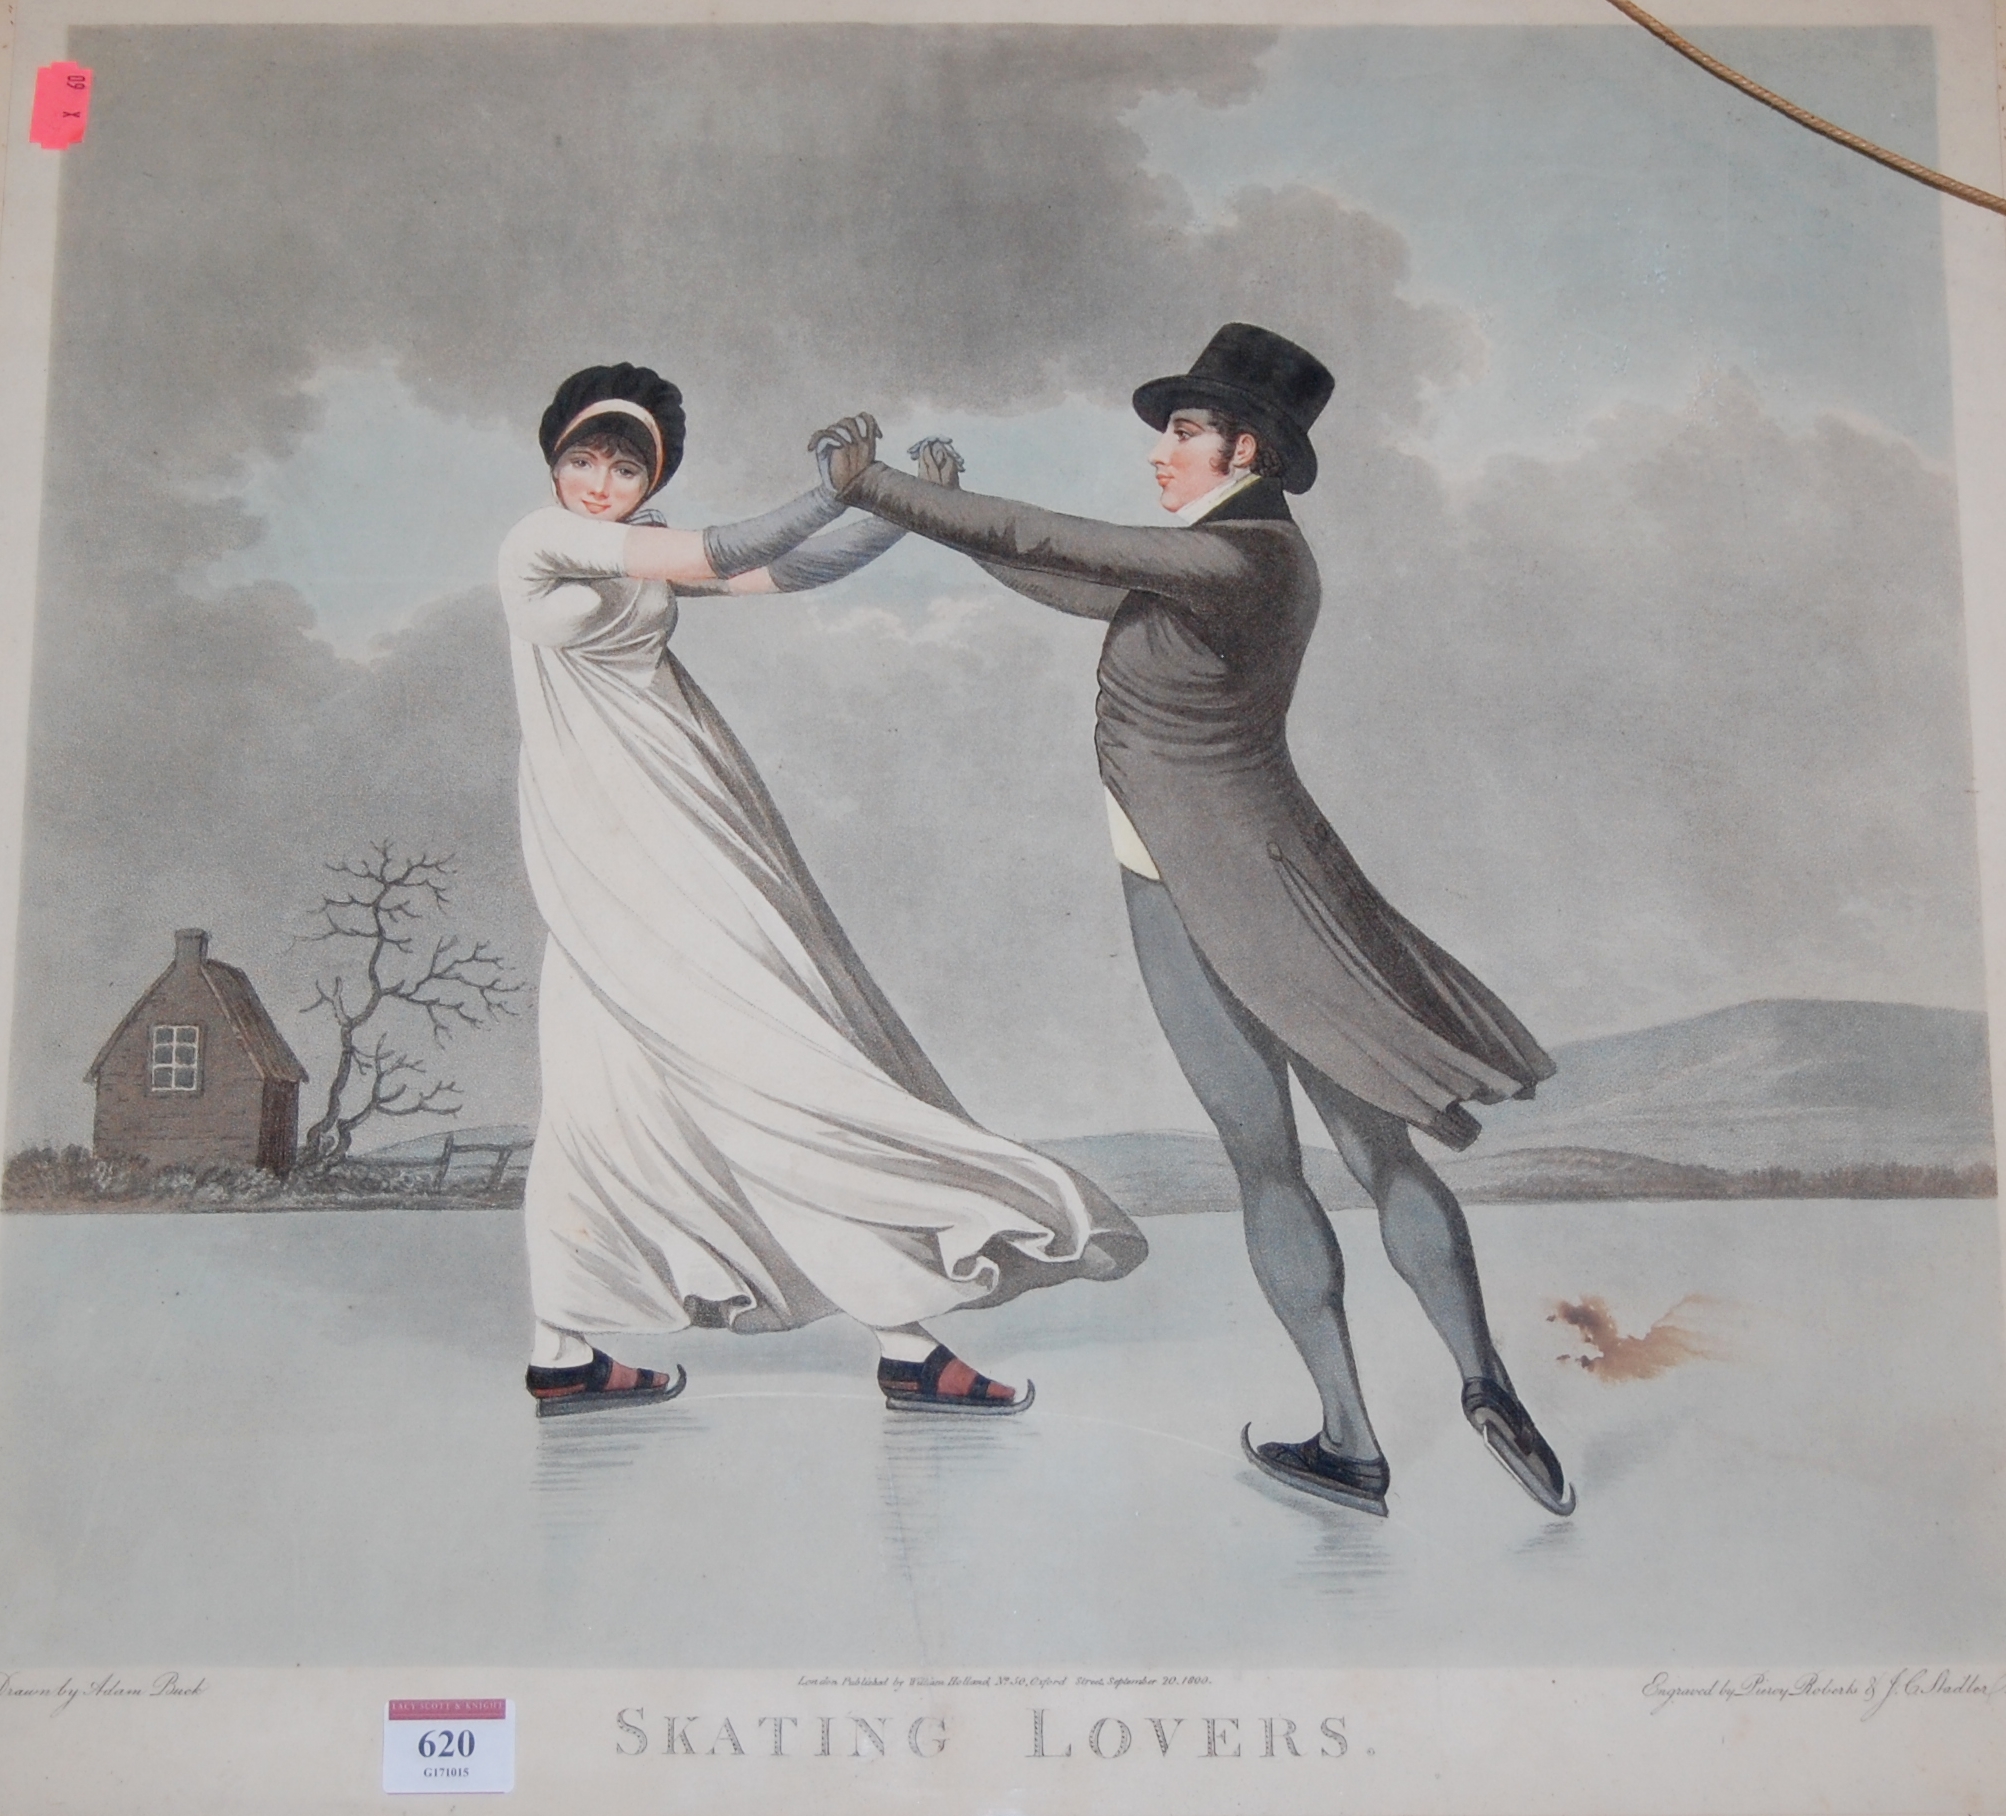 After Adam Buck - Skating Lovers, stipple engraving, publisher William Holland, Oxford Street,